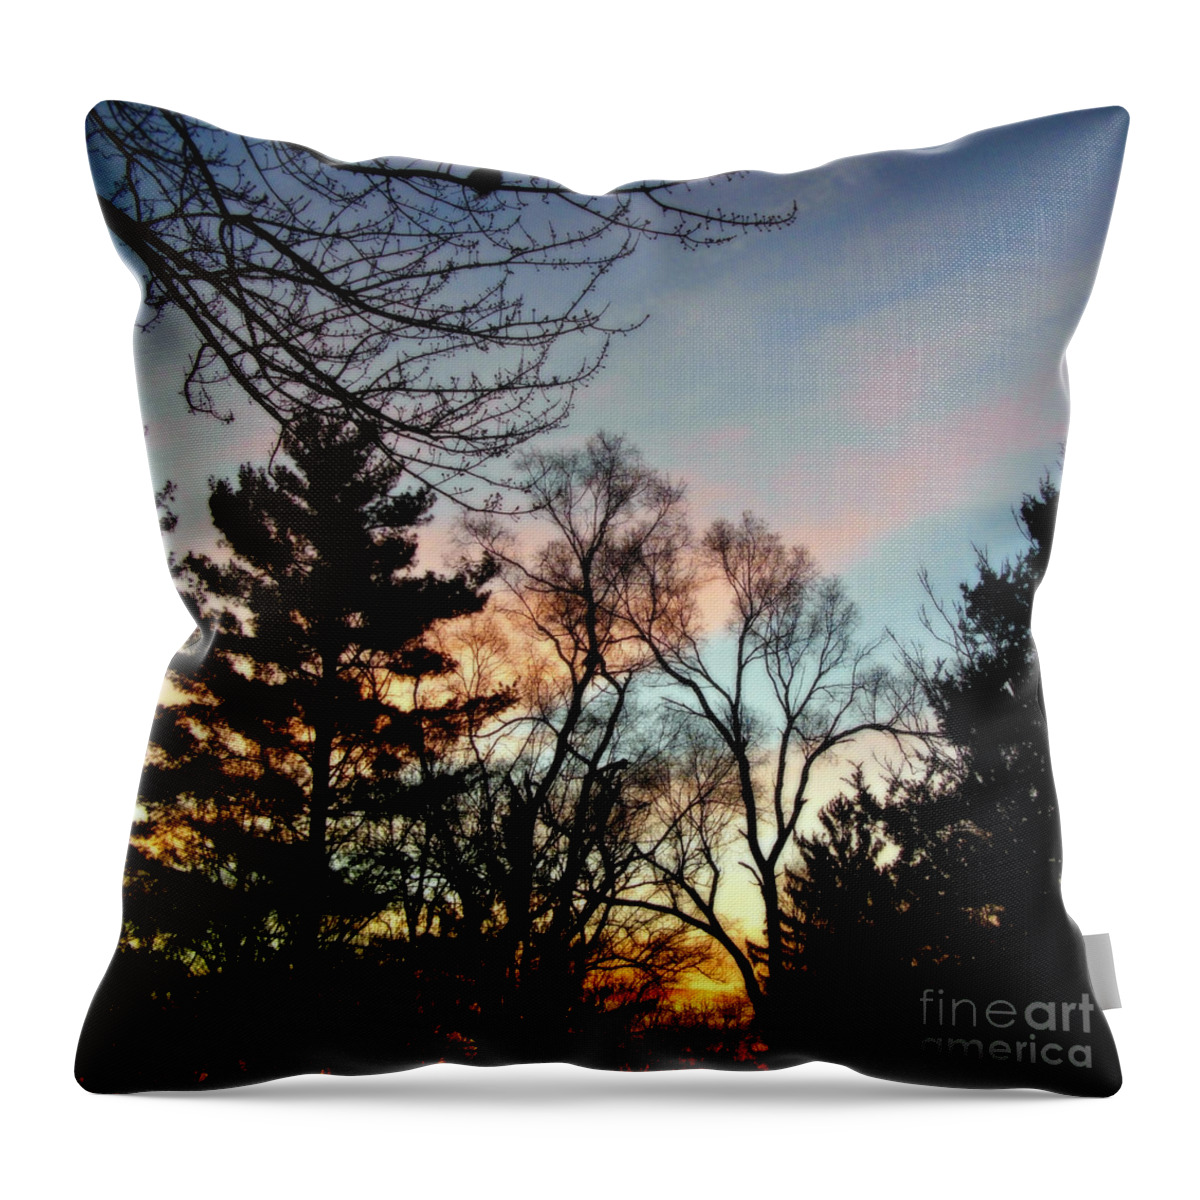 Landscape Photography Throw Pillow featuring the photograph Bold Sunrise Pastel Sky - Square by Frank J Casella